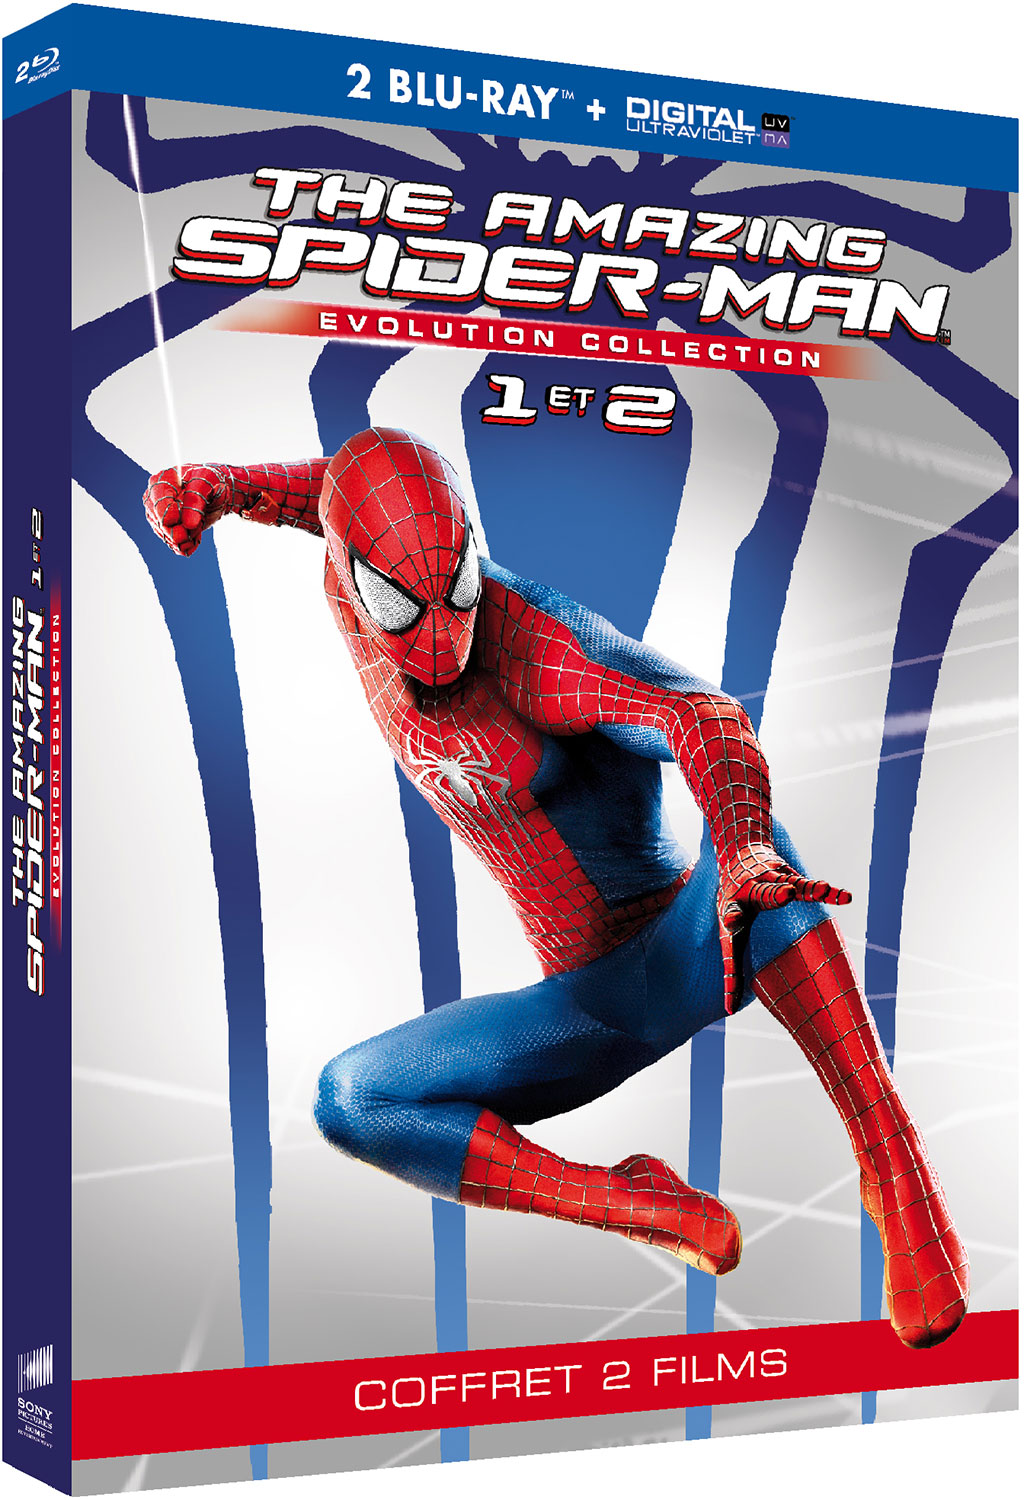 THE AMAZING SPIDER-MAN LEGACY - 2 BD